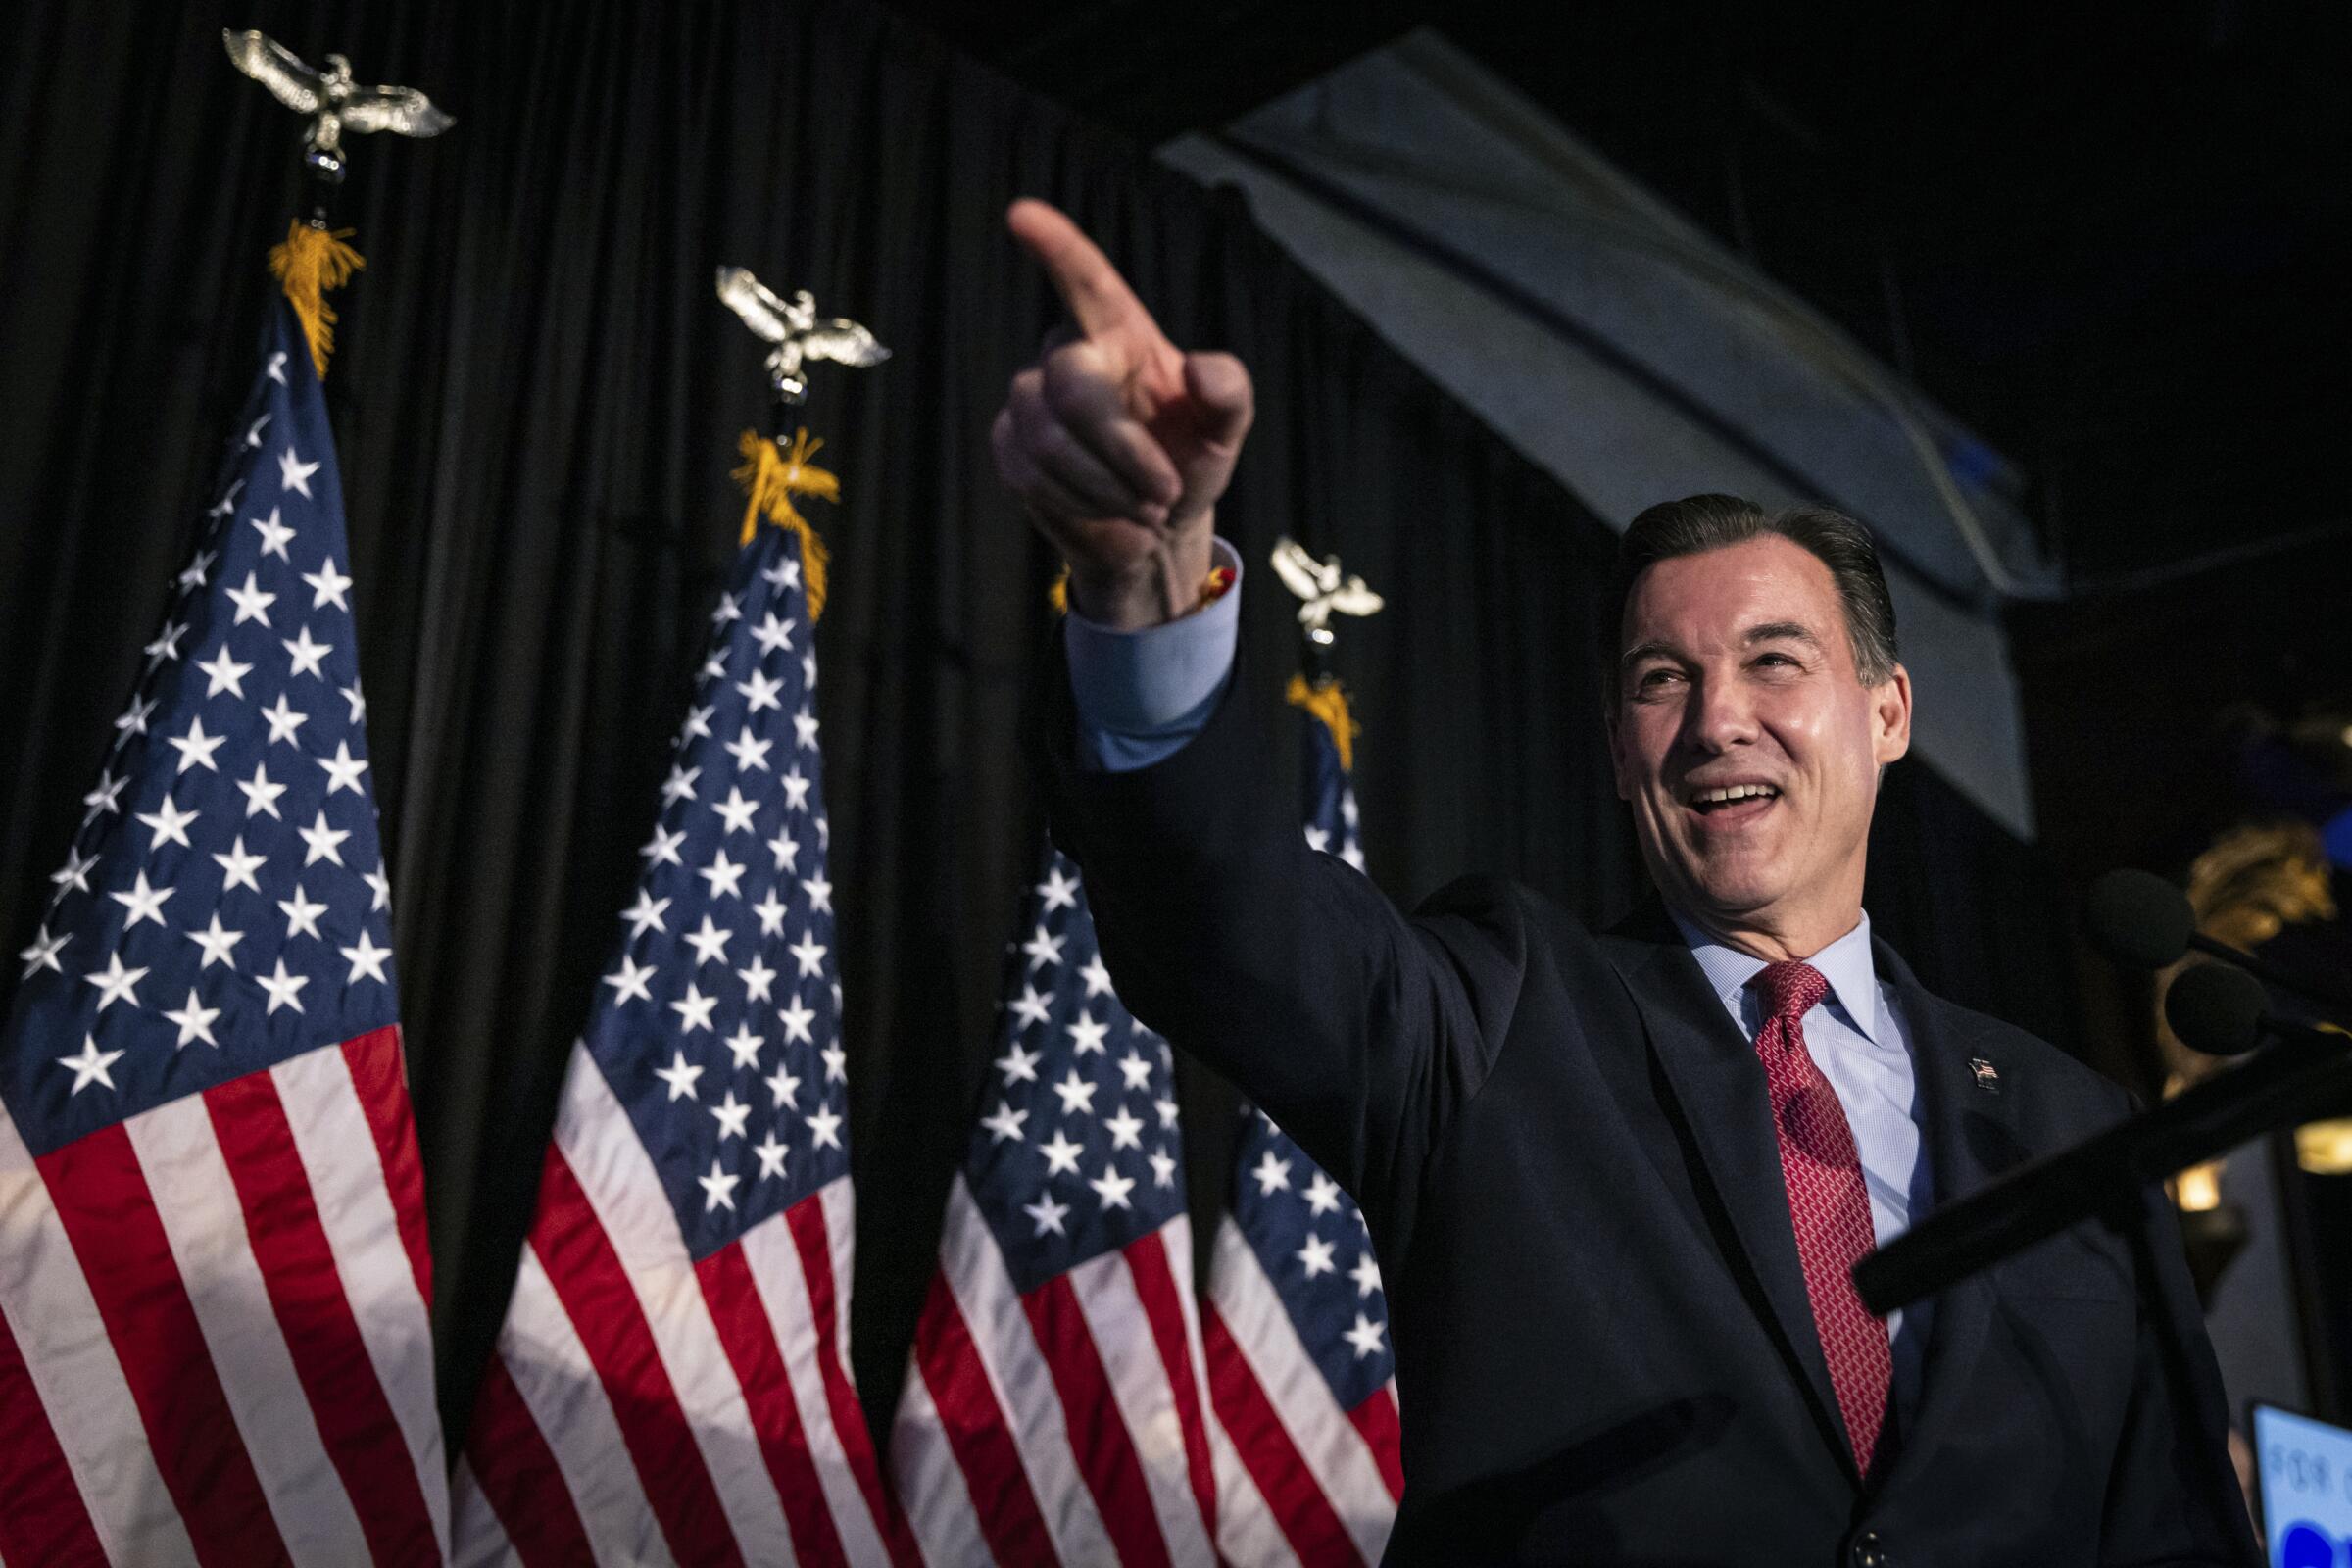 Tom Suozzi points at supporters from a stage in front of four furled American flags 